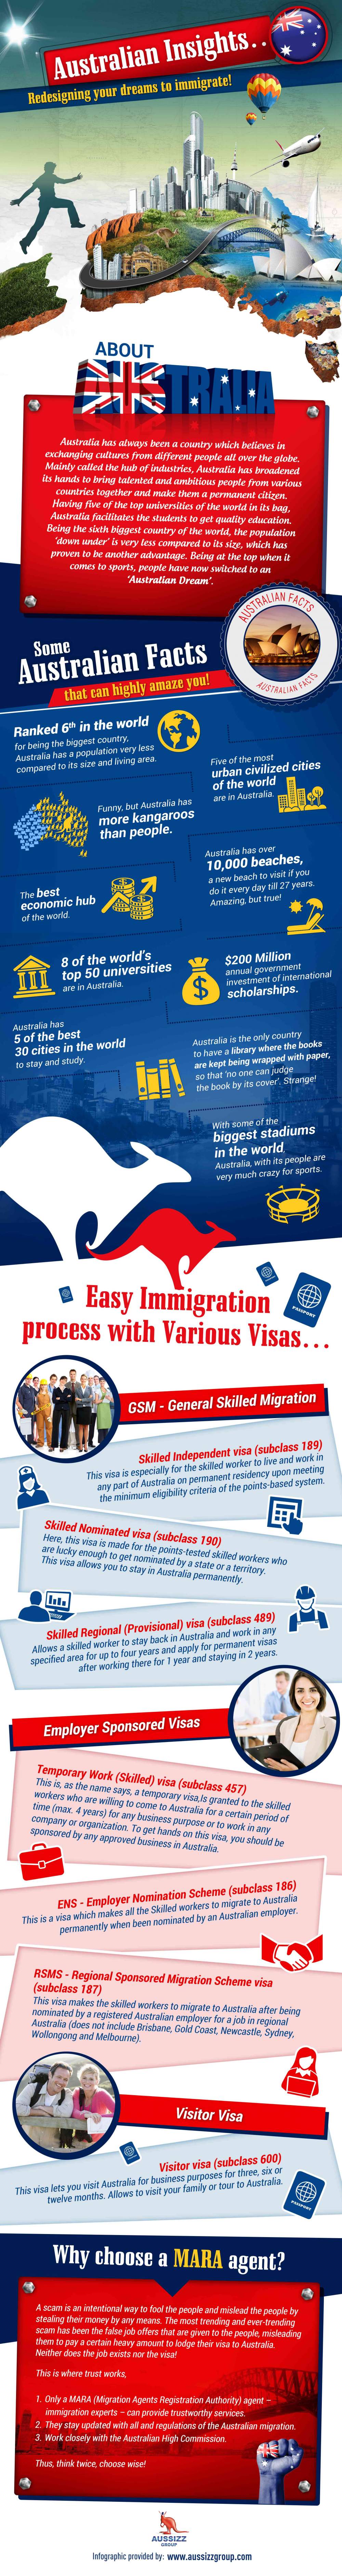 Understand Australia, redesign your dreams to Immigrate